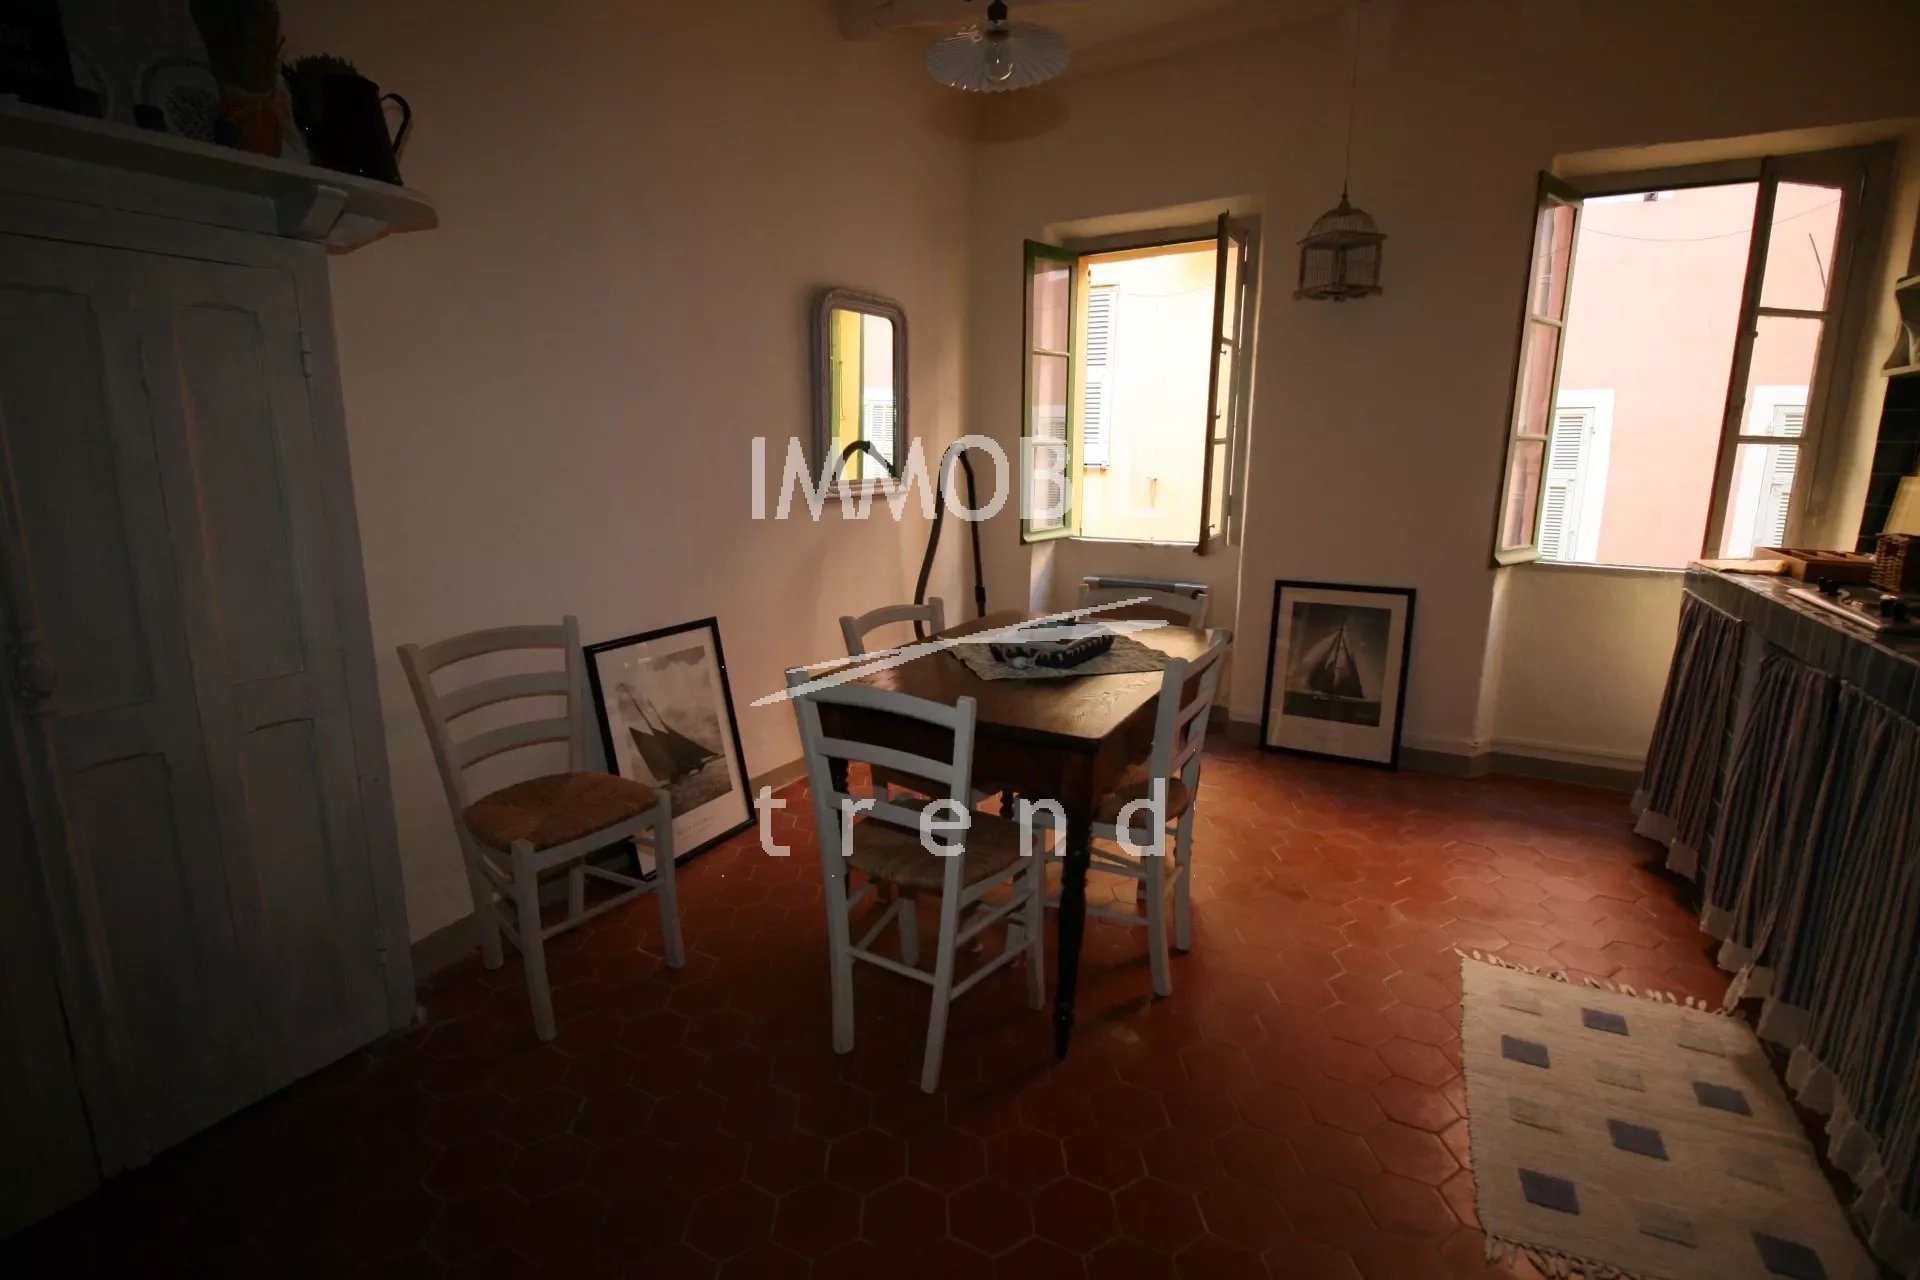 Menton Old Town - large studio for sale.